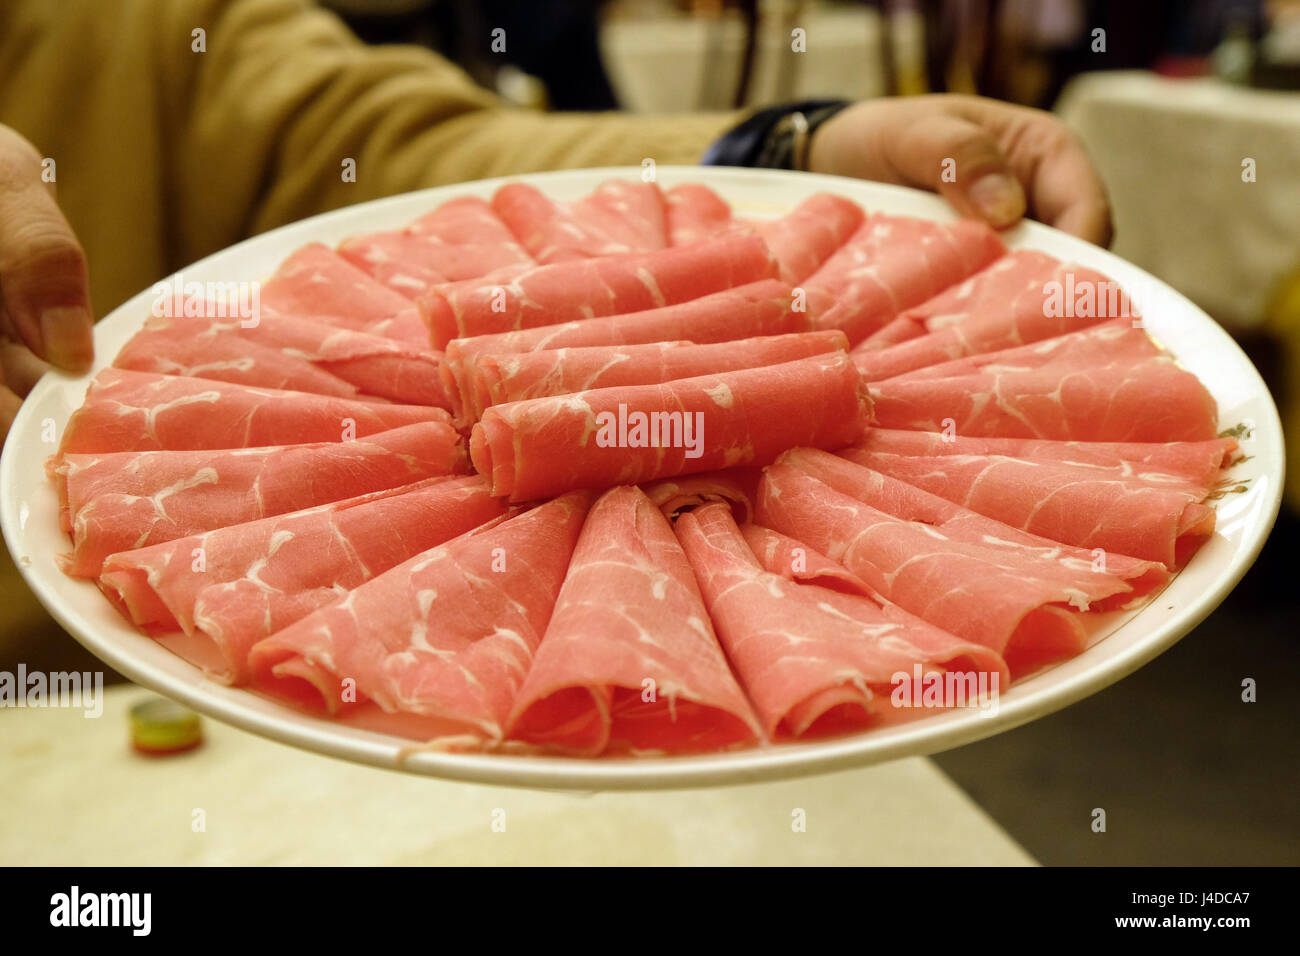 Mutton prepared for cooking in the hot pot, in Beijing, China, February 24, 2016. Stock Photo